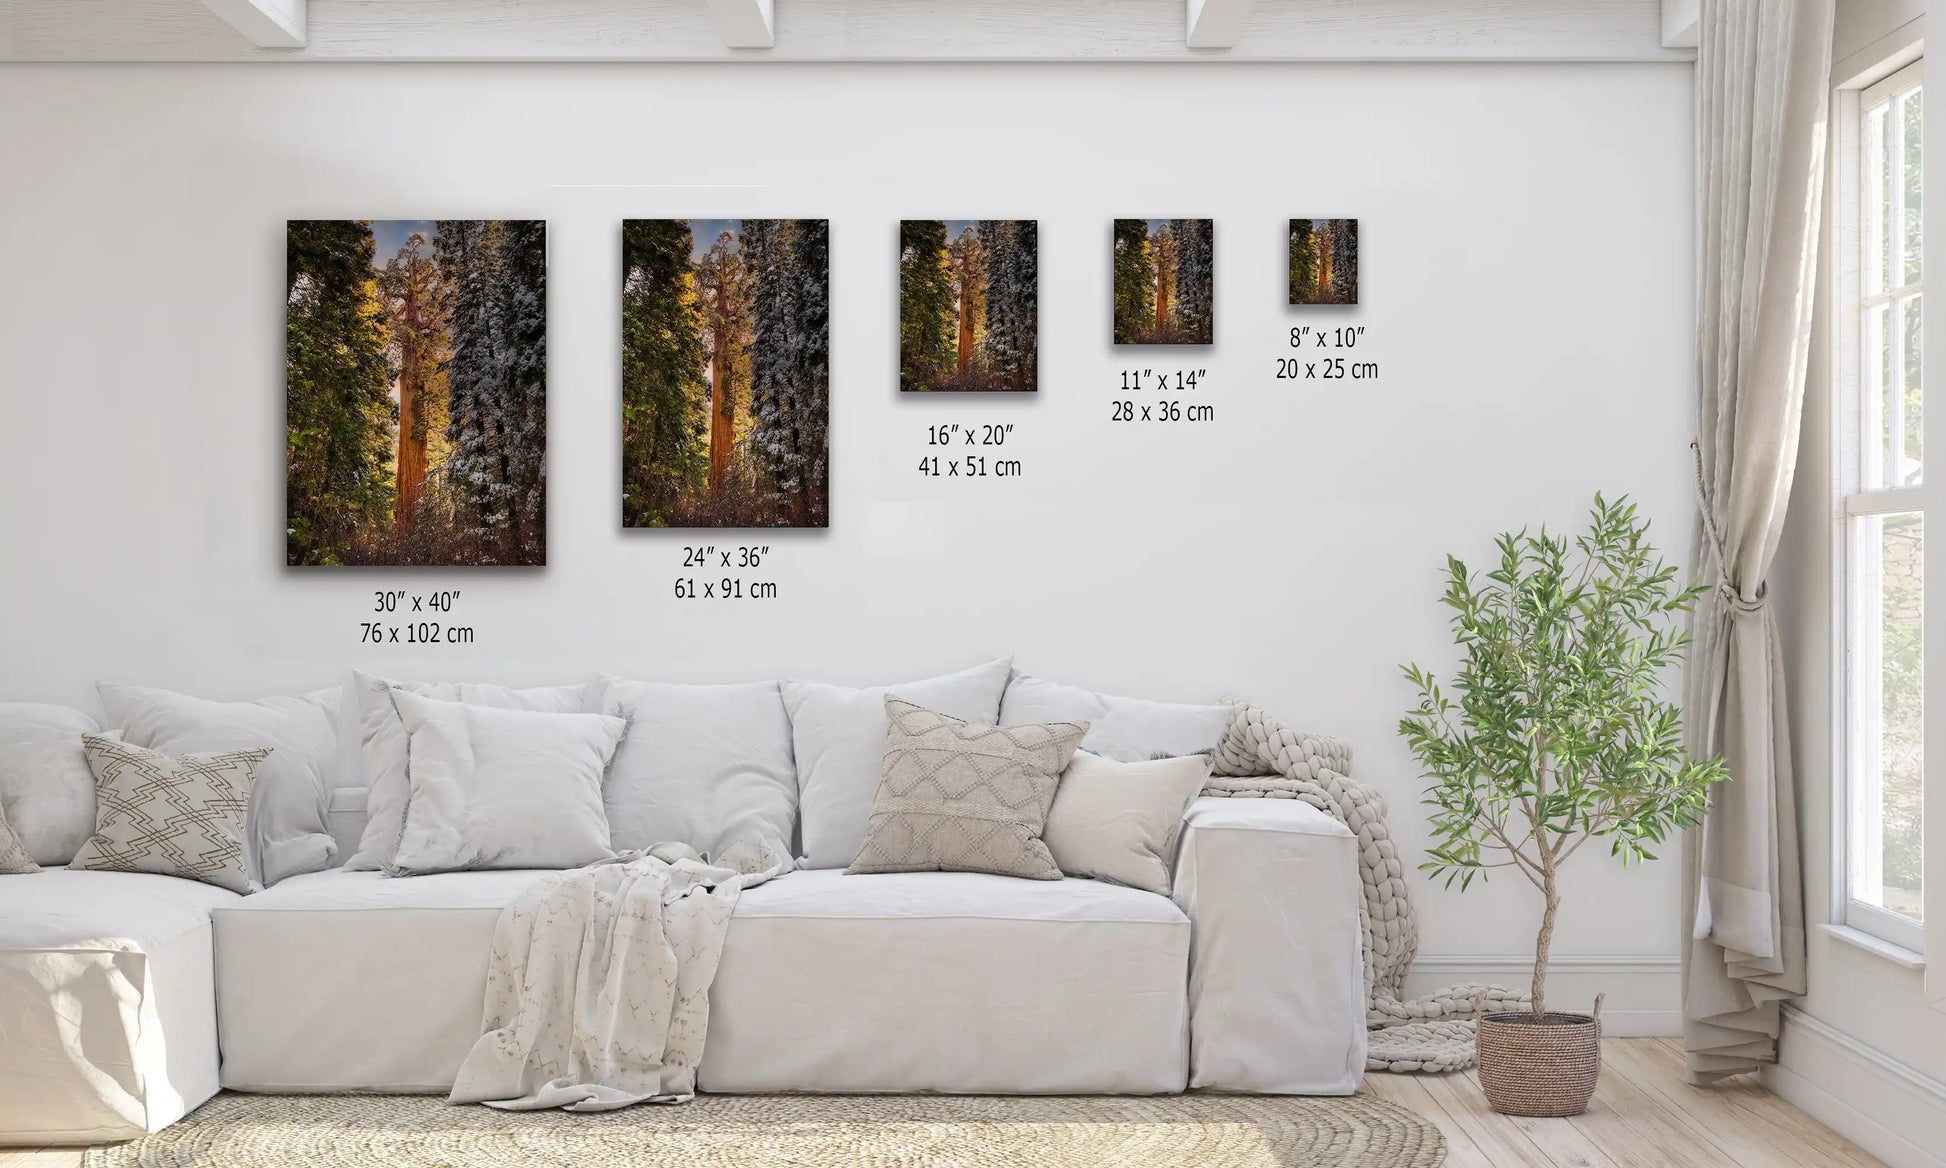 A wall display shows various sizes of the Giant Sequoia canvas, allowing the grand presence of Grant Grove to be tailored to different spaces and styles.